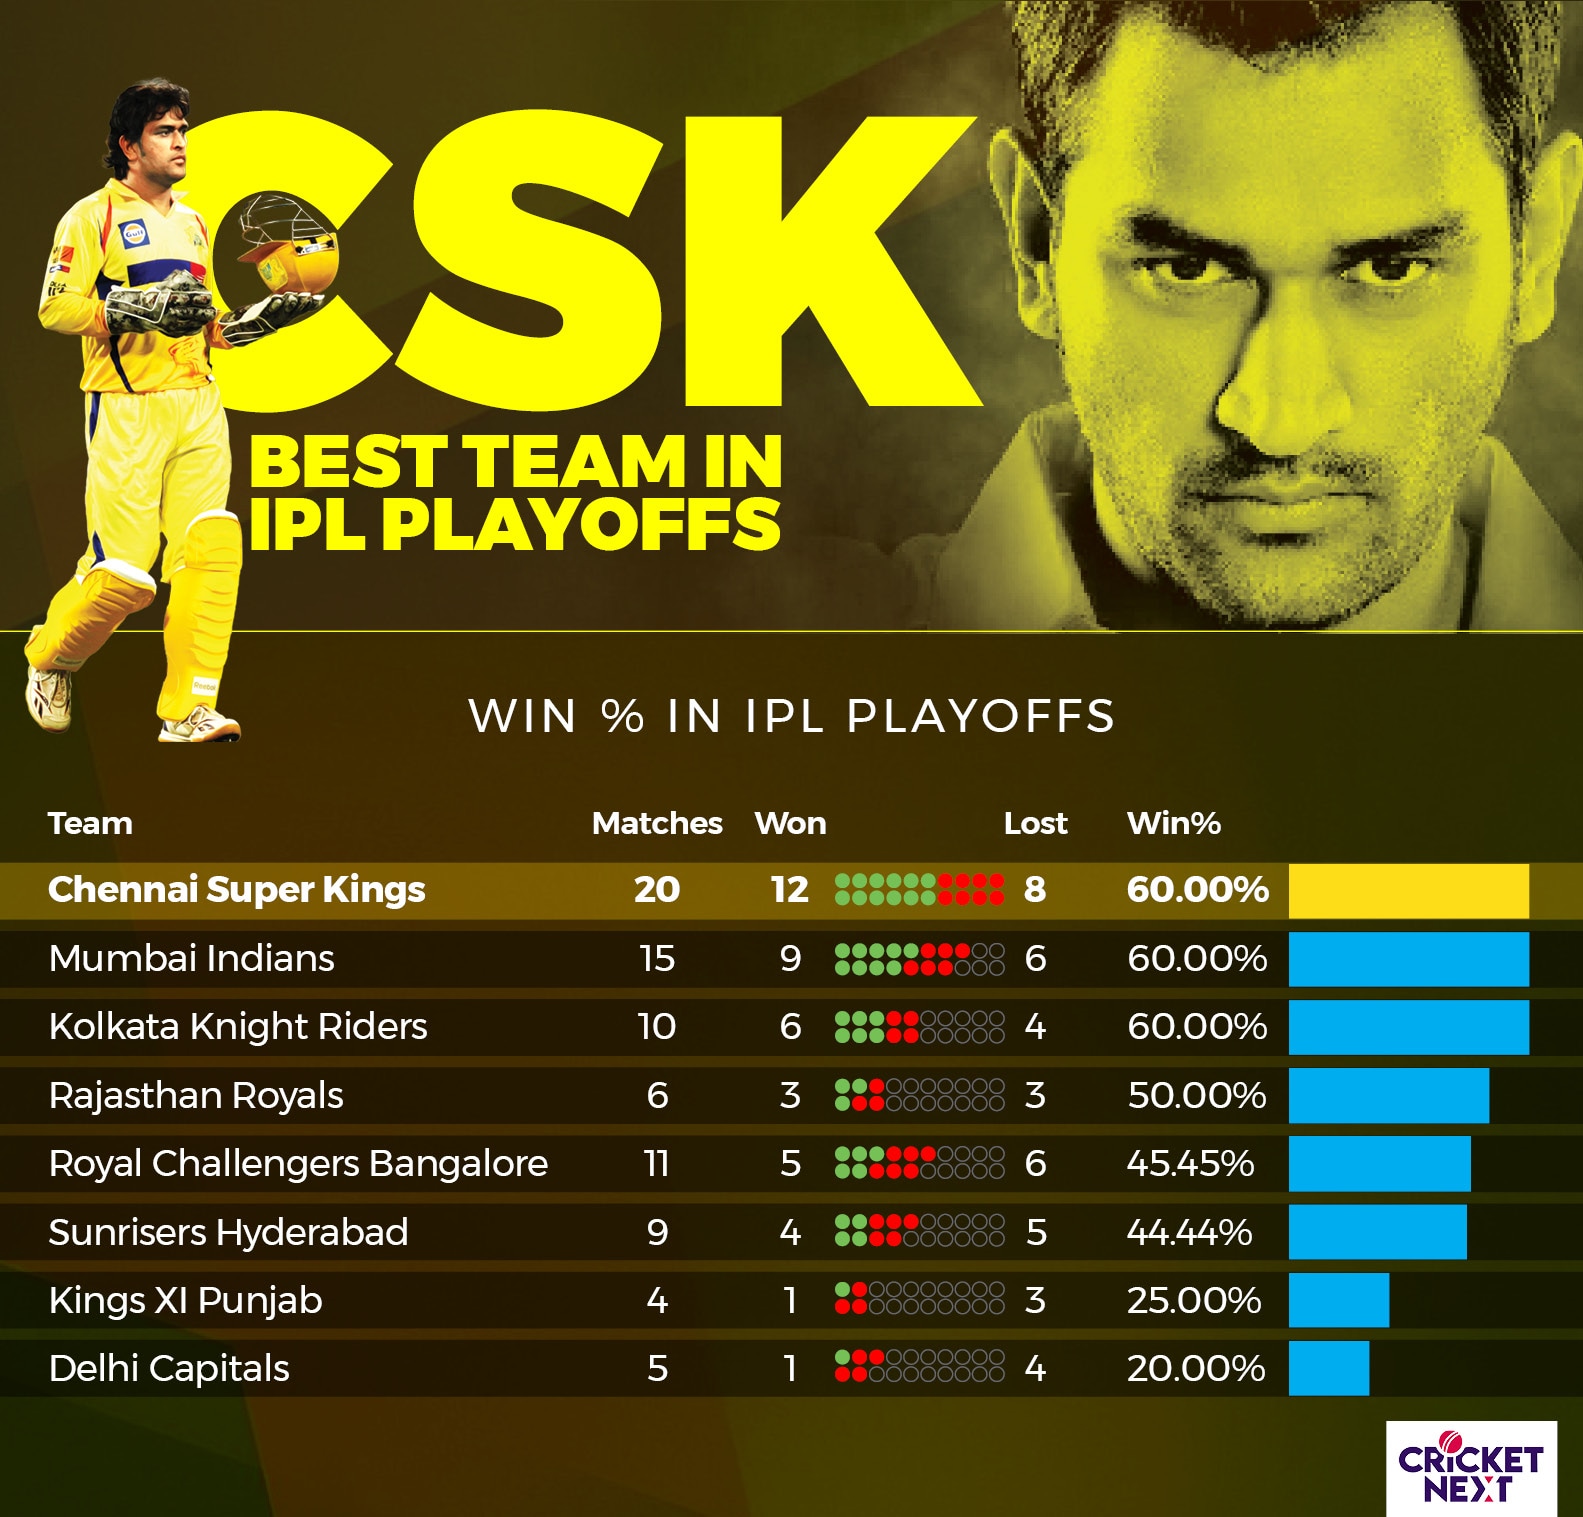 csk all players jersey numbers